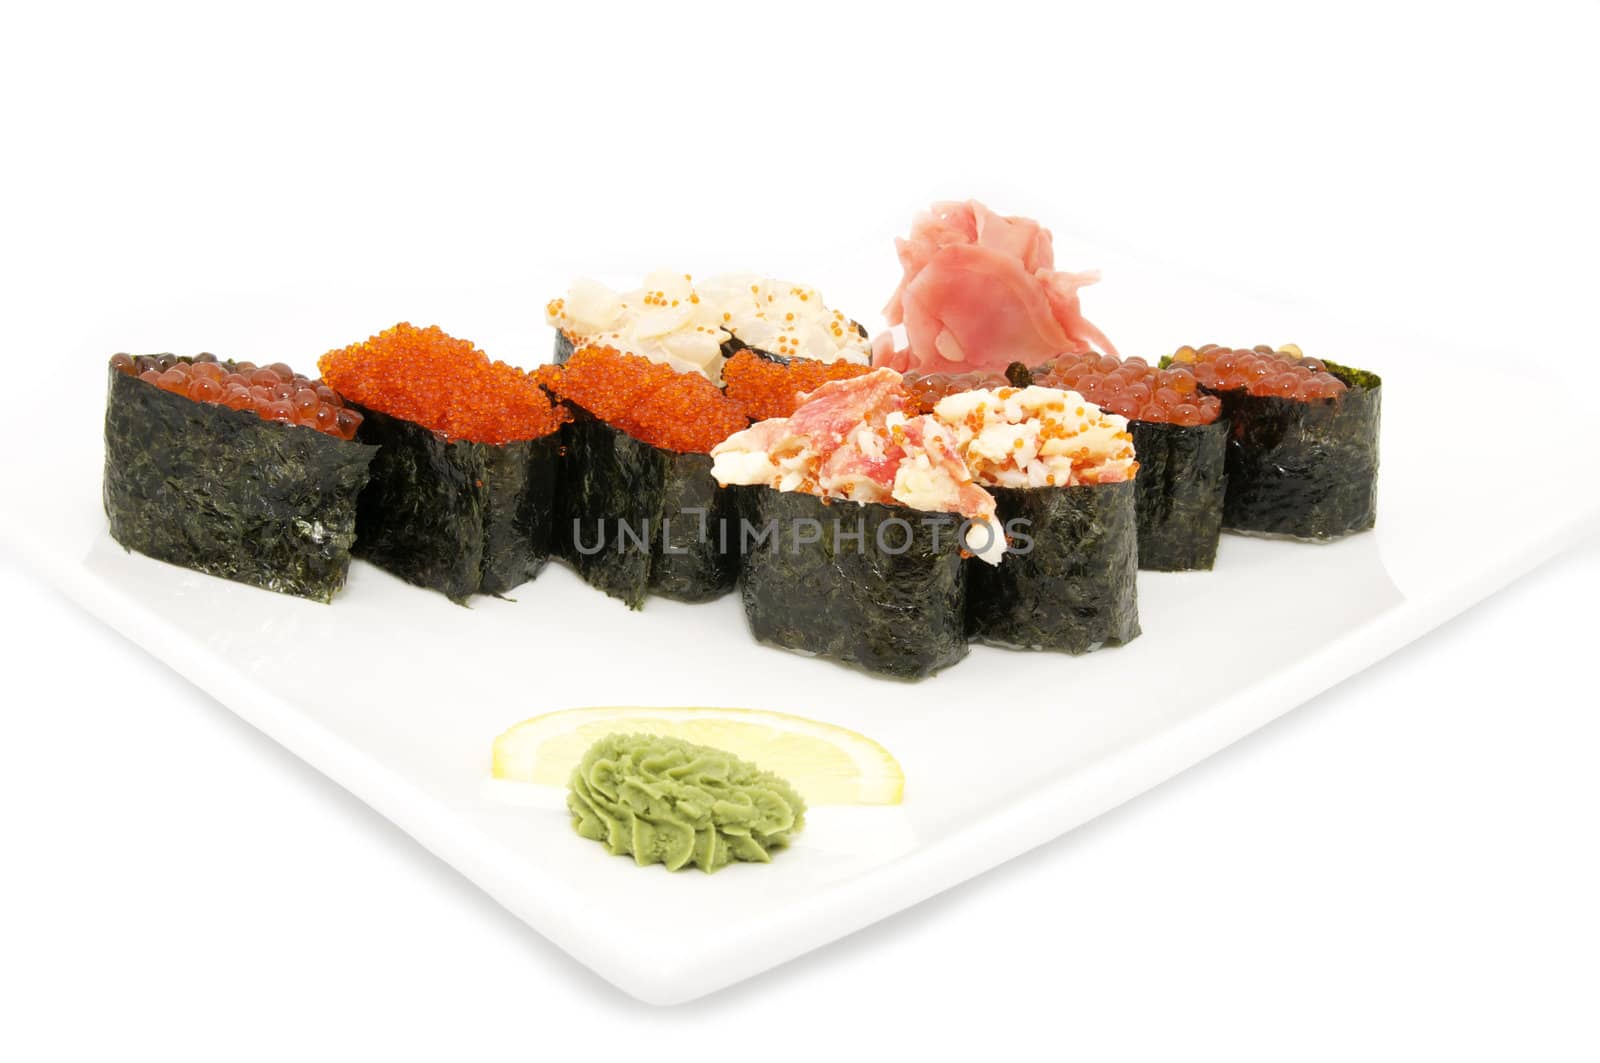 Japanese sushi on a plate on a white background